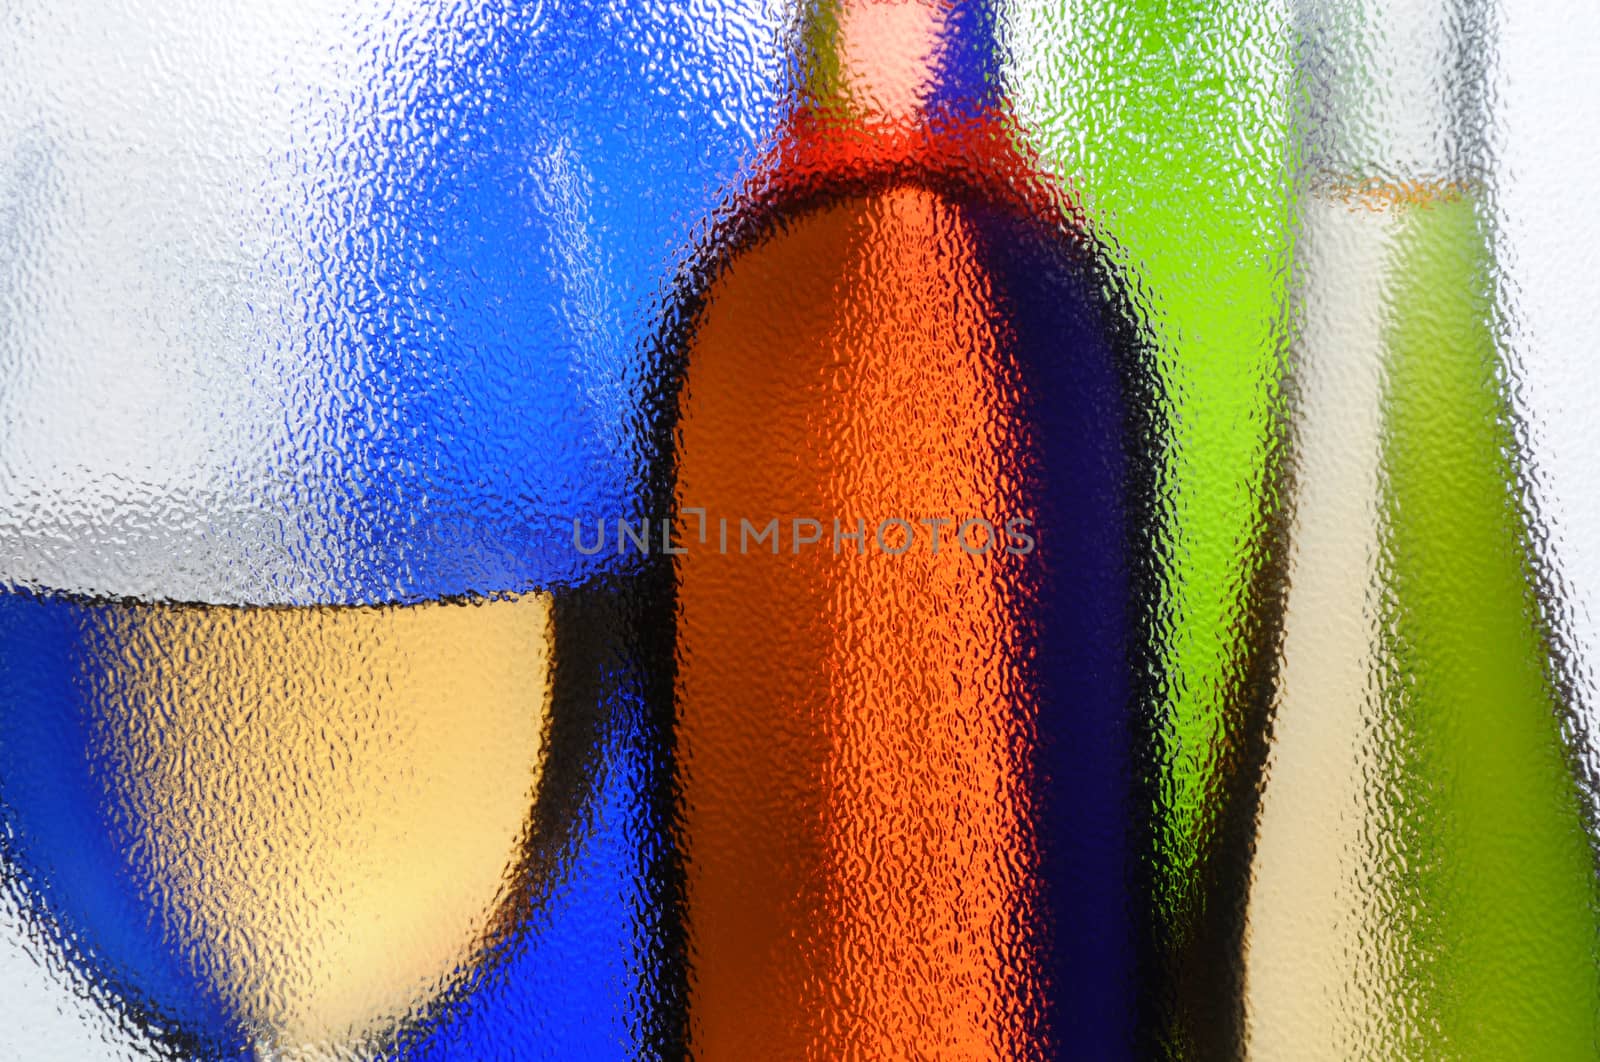 Wine Bottles and Wineglass seen through a textured window with backlight. Horizontal composition.